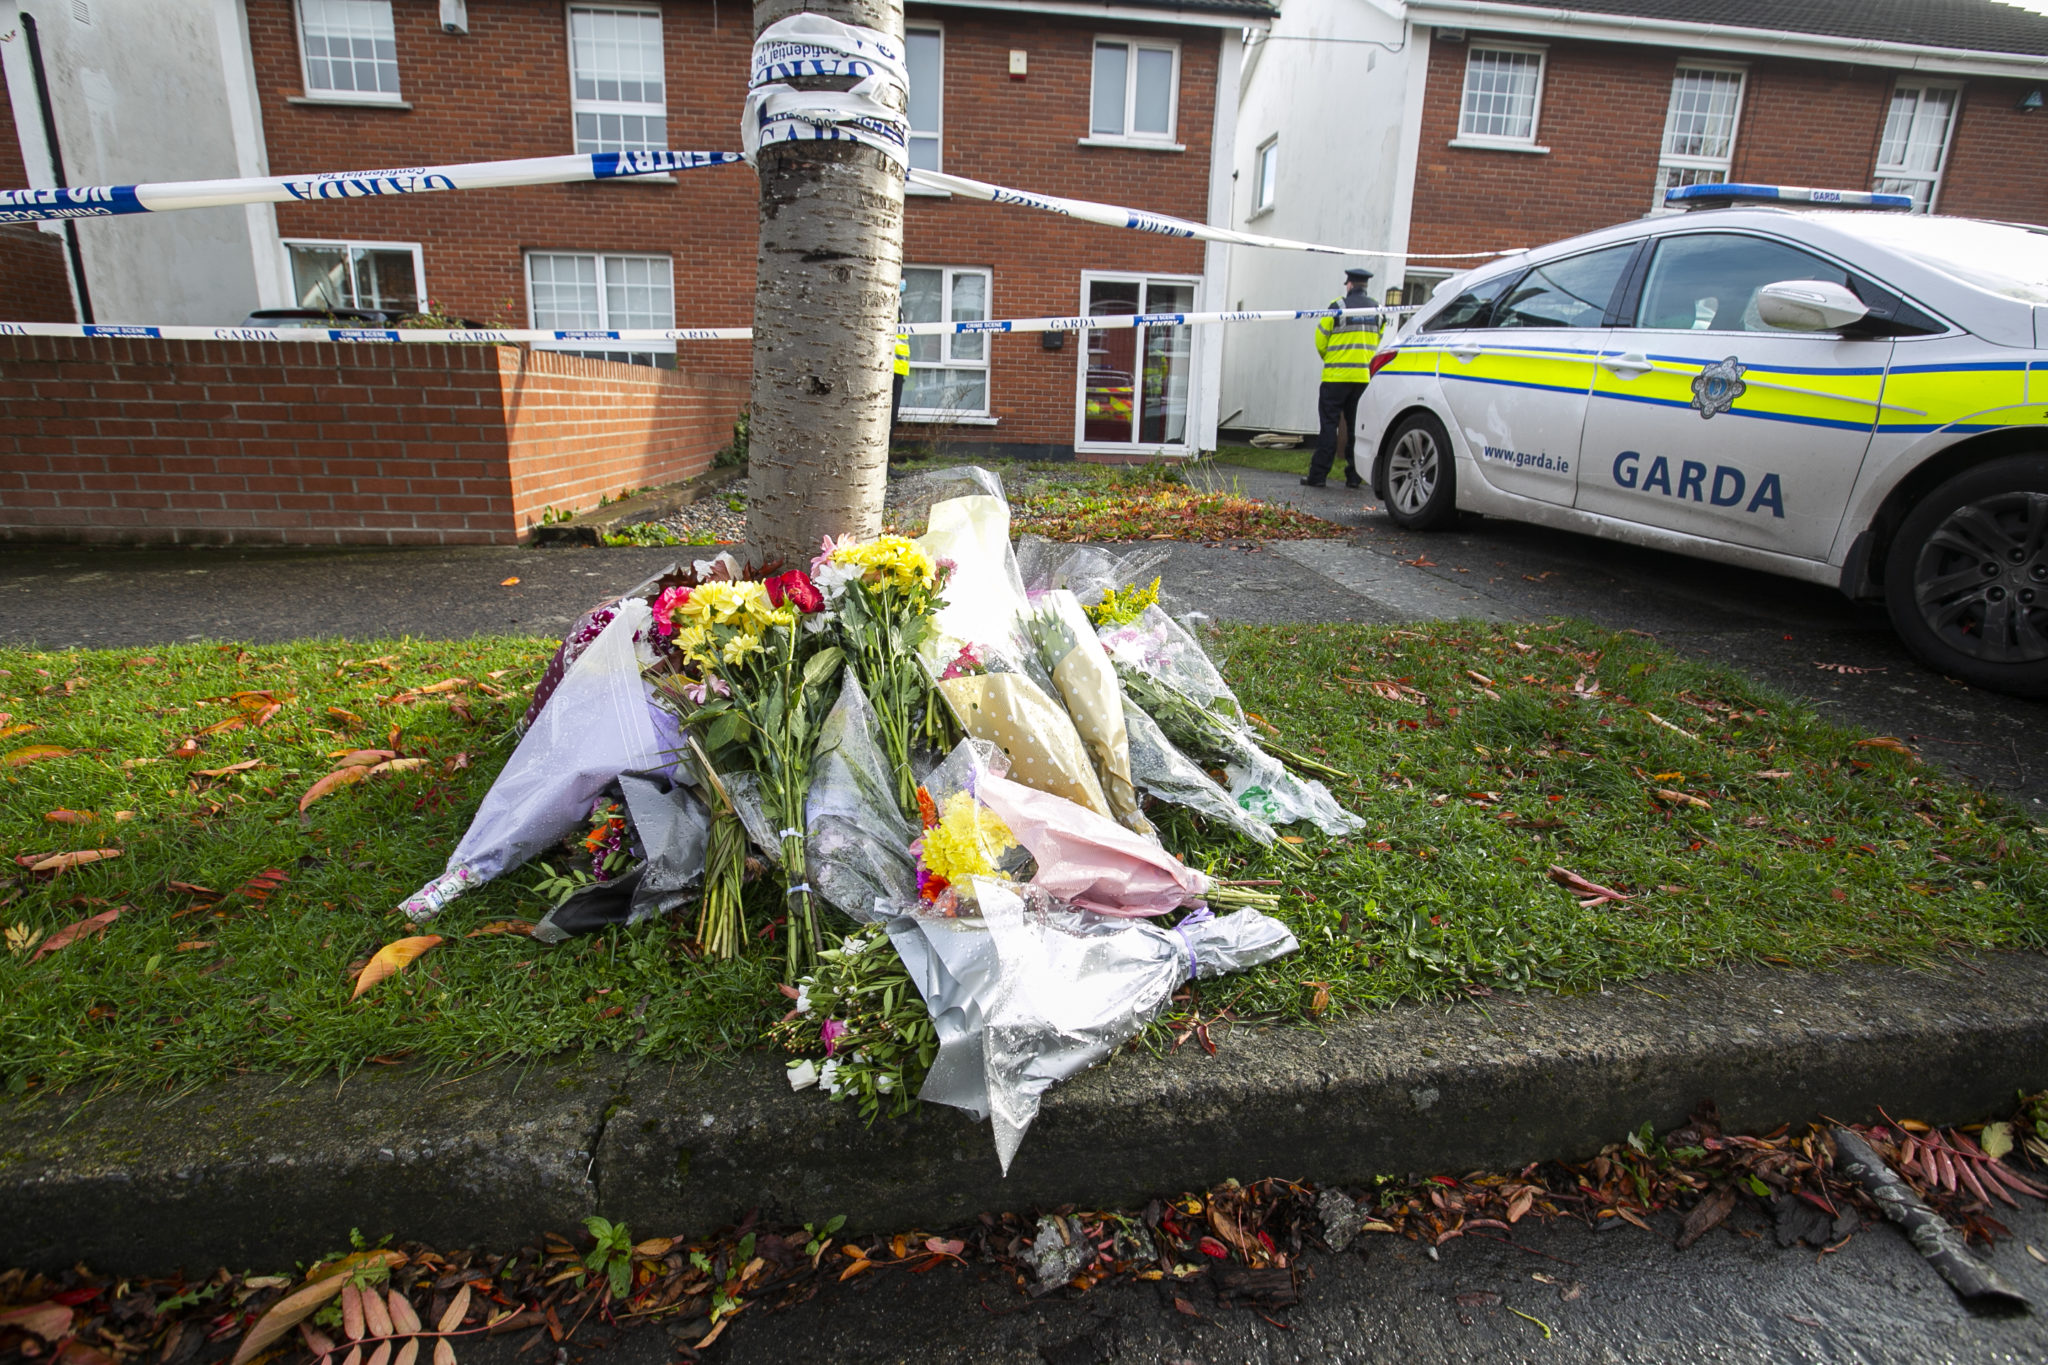 Gardaí and flowers outside the house in the Llewellyn Court estate in Ballinteer in which the bodies of 37-year-old Seema Banu, her daughter Asfira, and her son Faizan were found murder